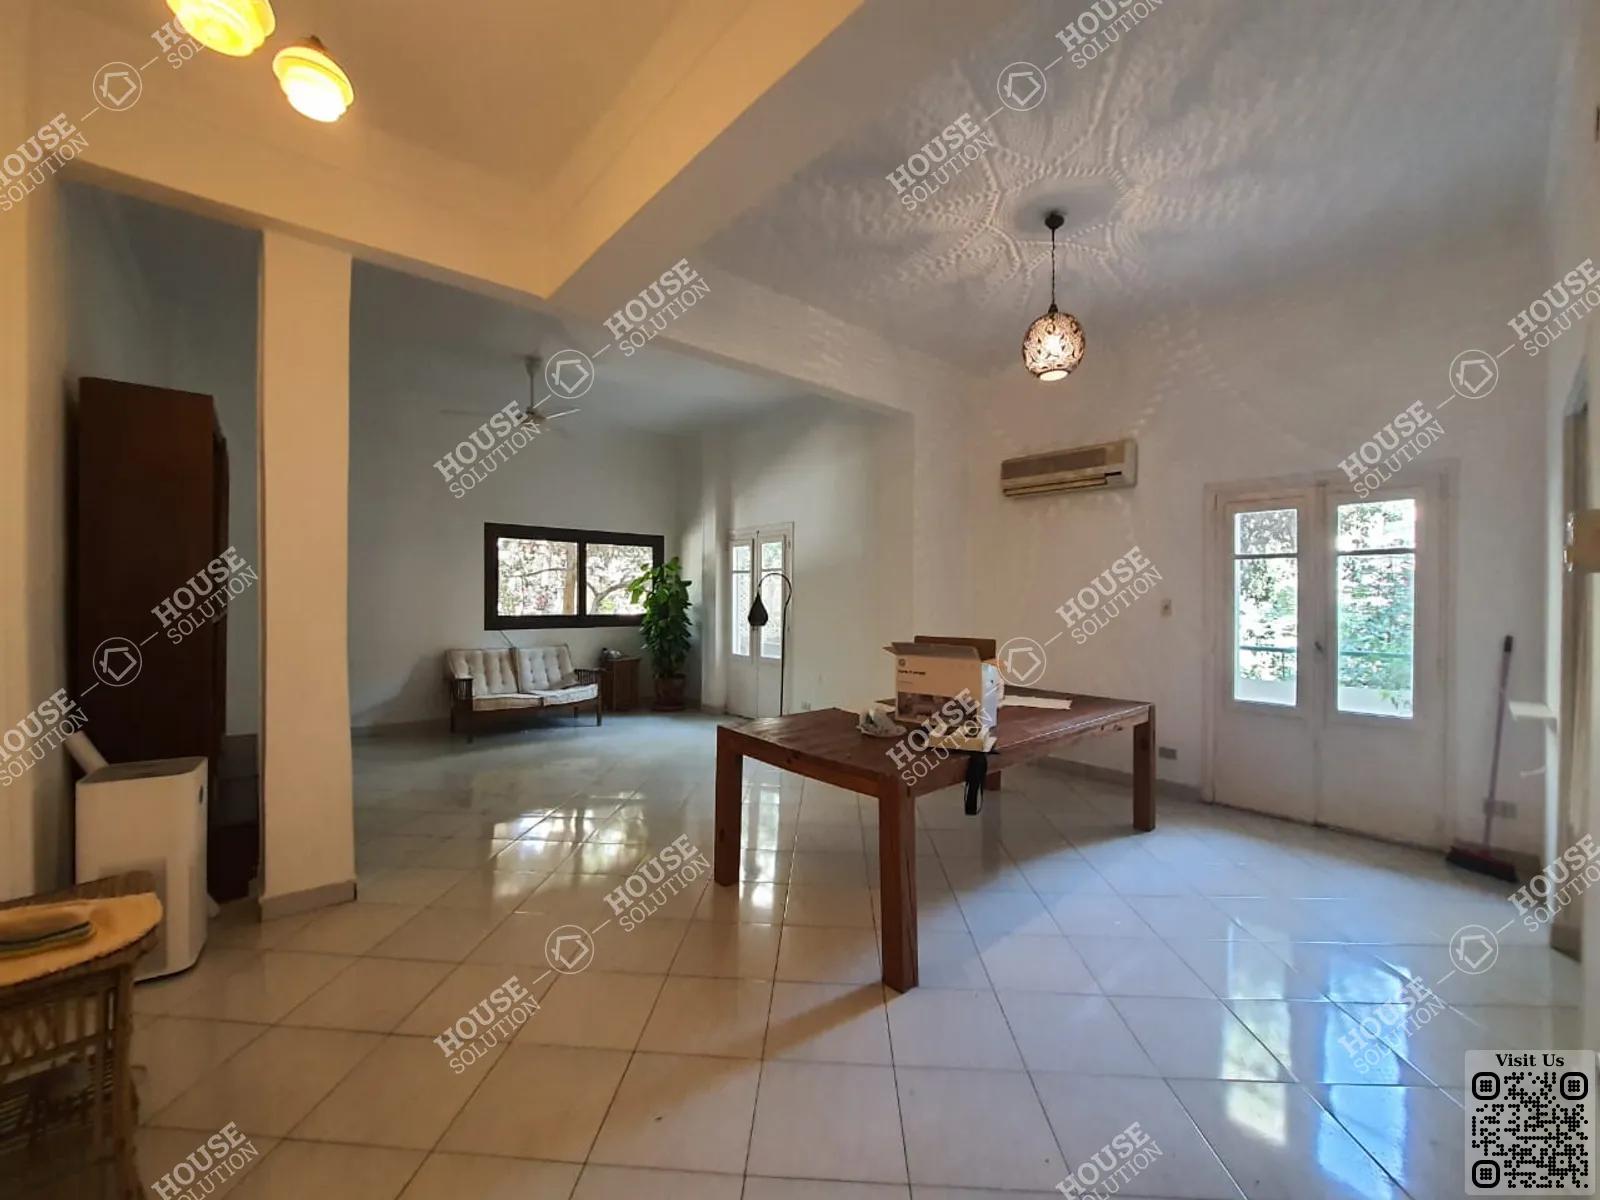 RECEPTION  @ Apartments For Rent In Maadi Maadi Sarayat Area: 202 m² consists of 3 Bedrooms 2 Bathrooms Furnished 5 stars #5362-0